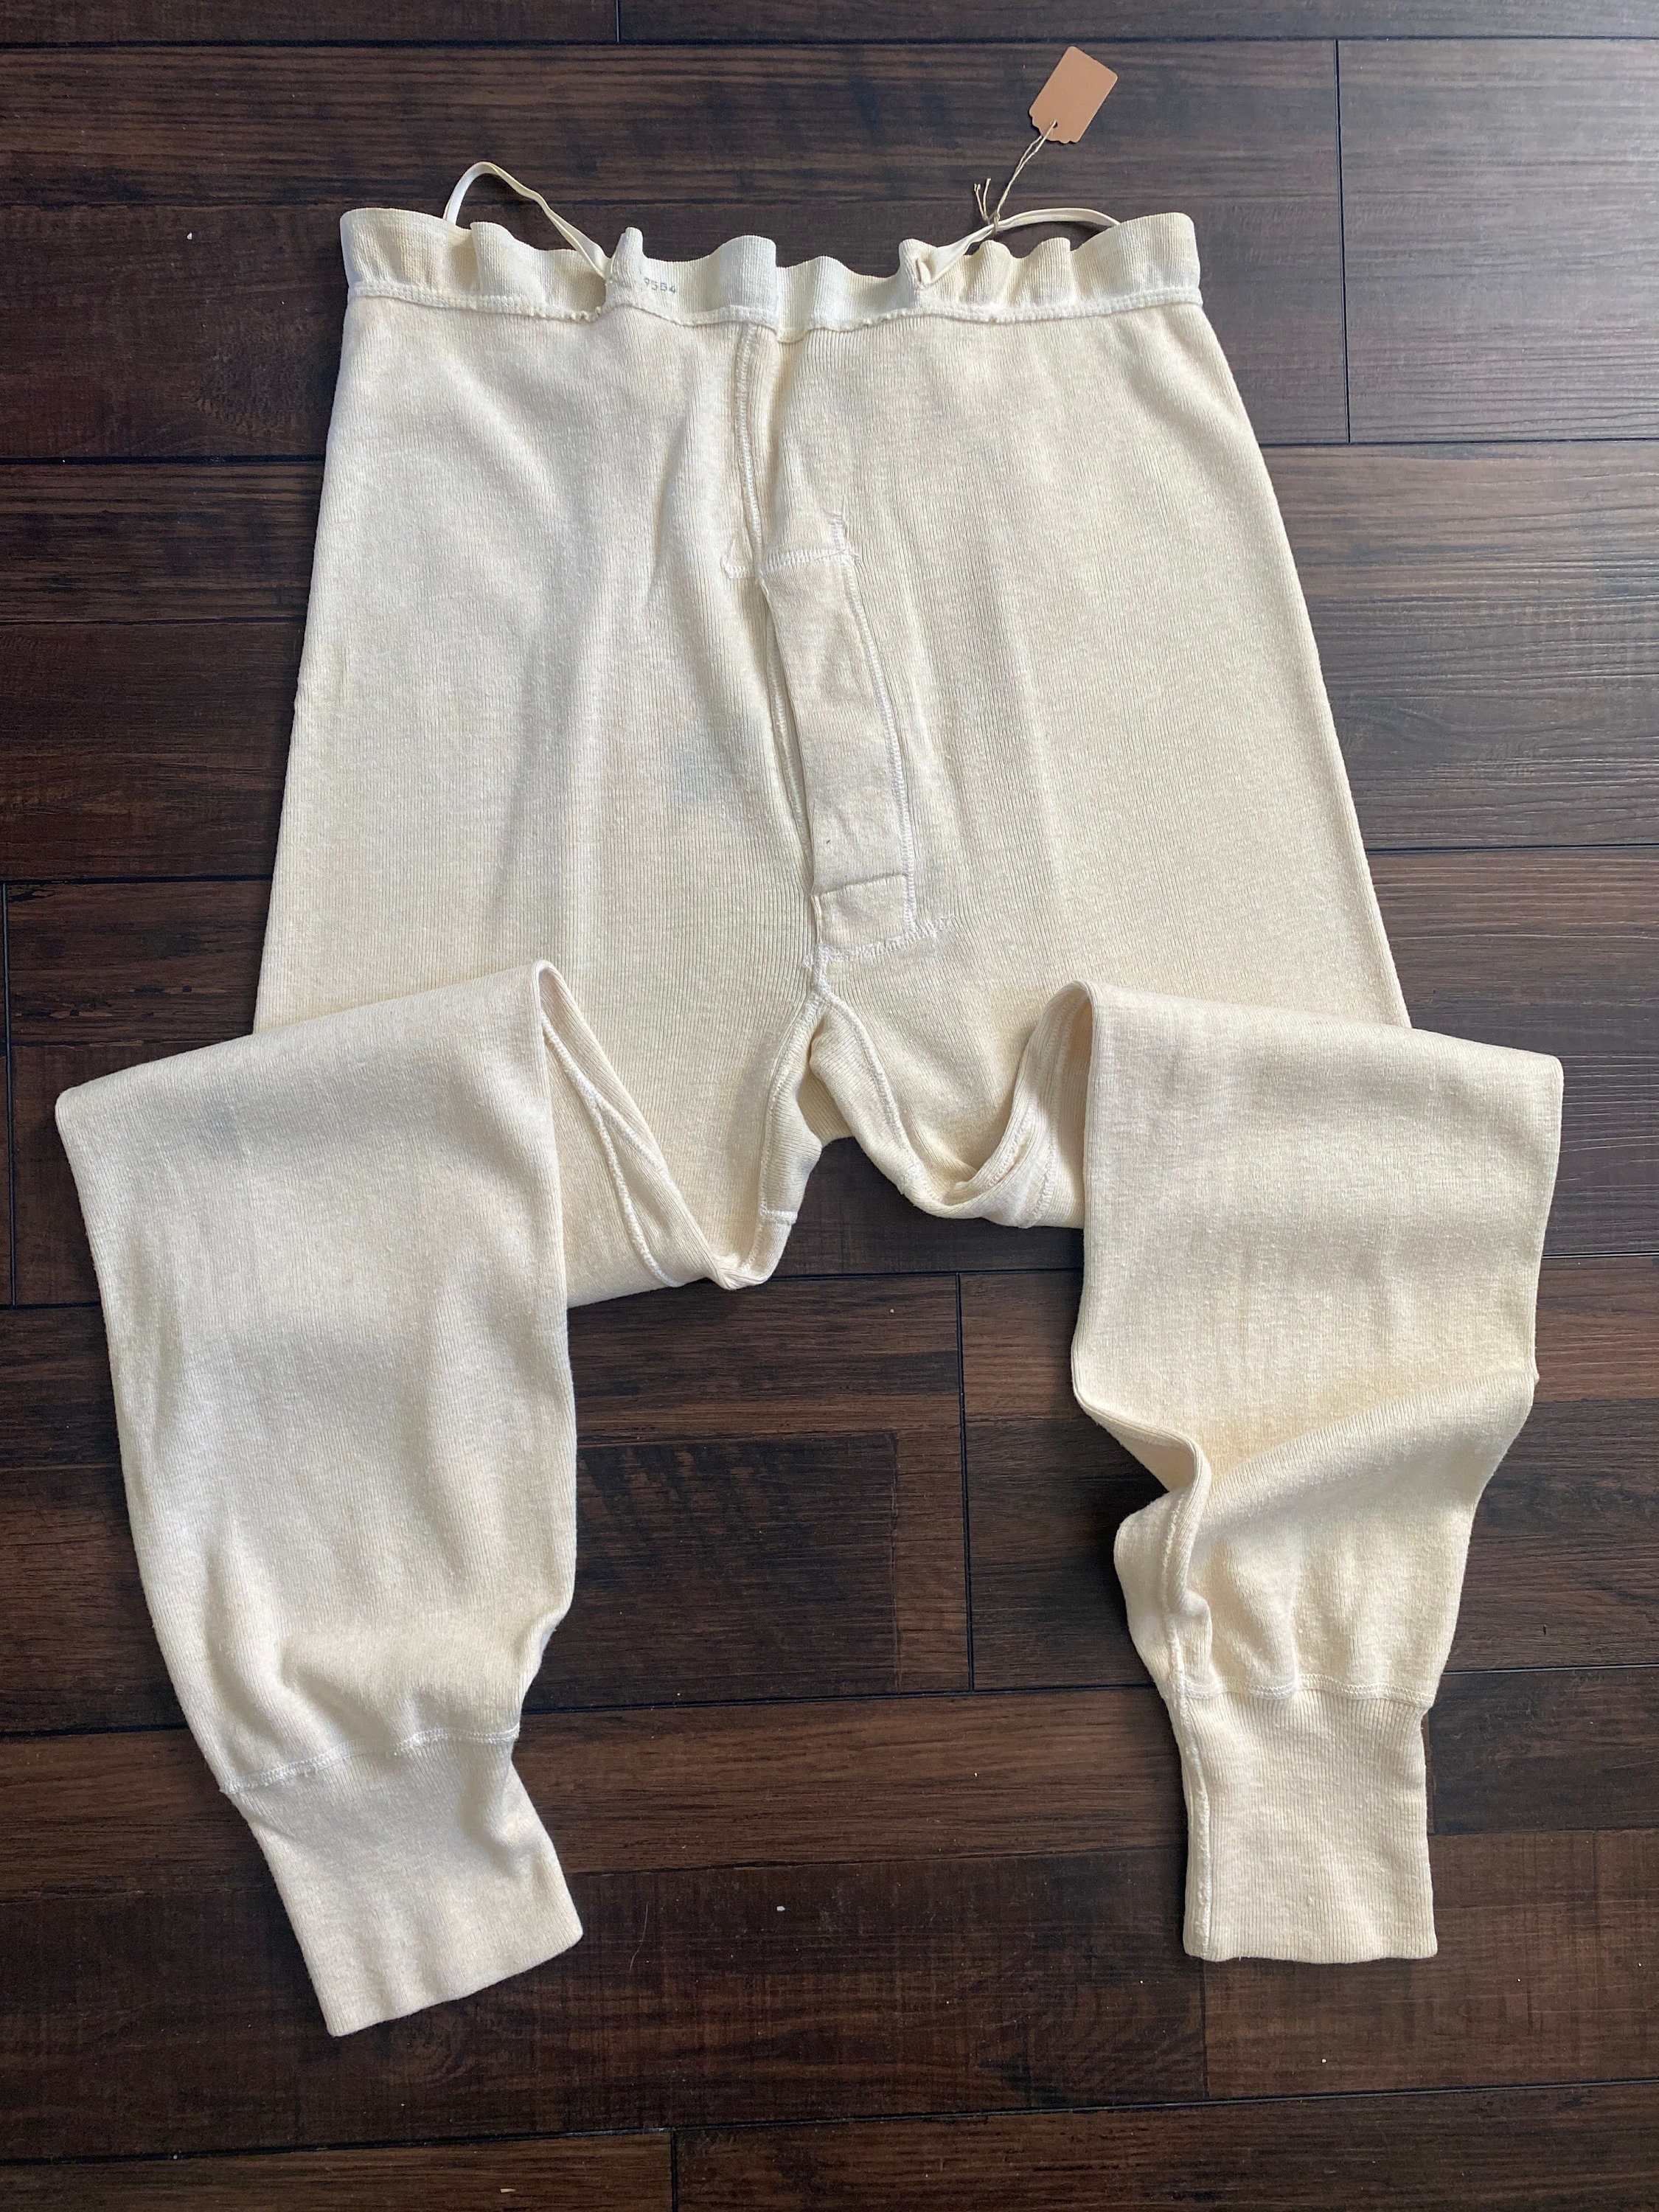 50s Vintage Military Winter Drawers Army Long Johns Military Issued  Underwear off White Size M. 